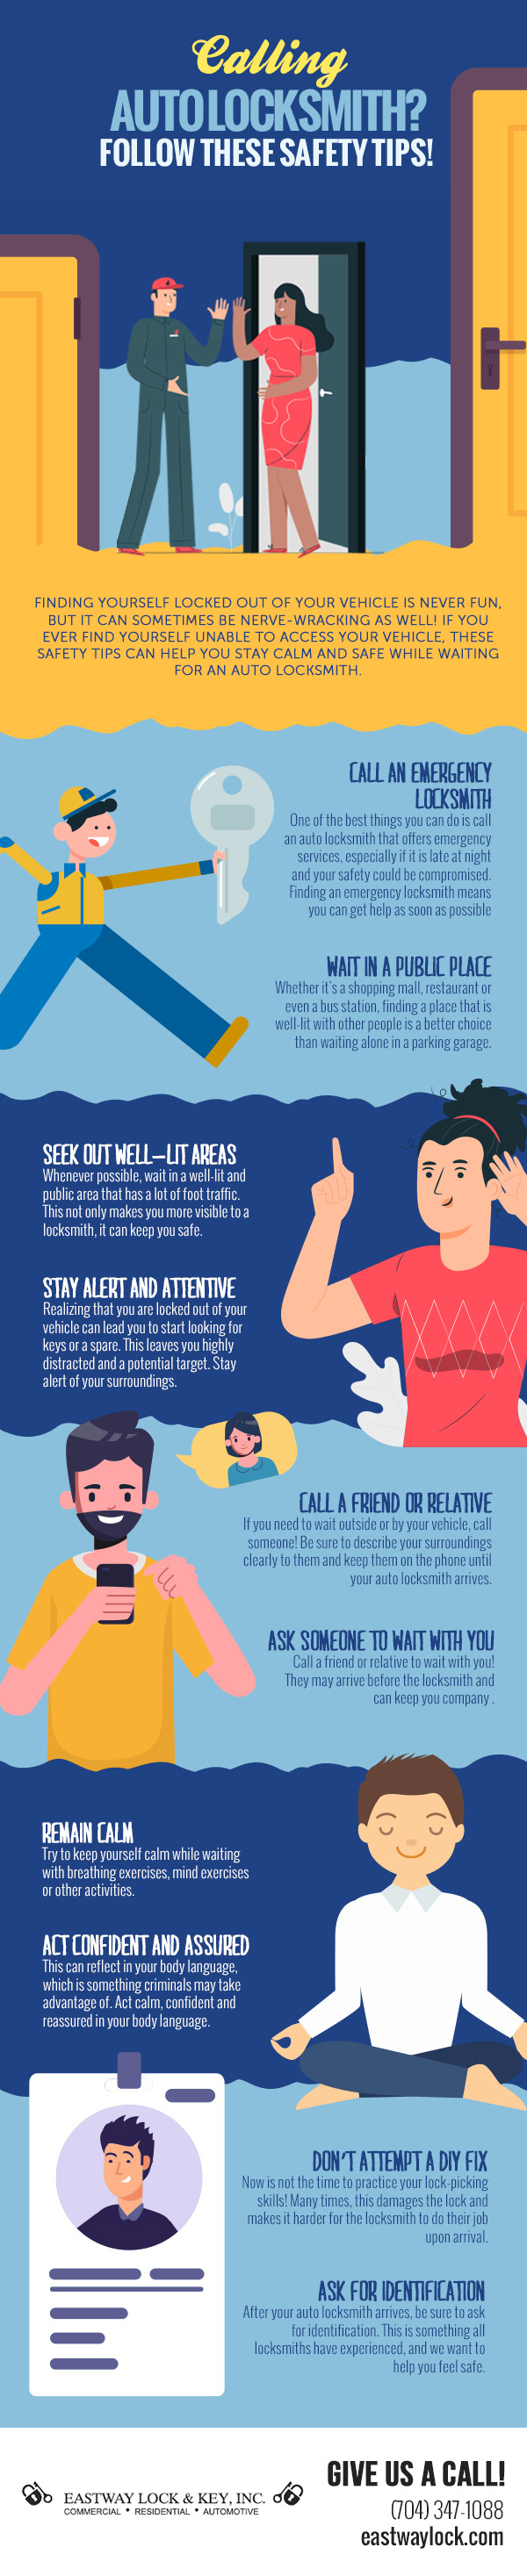 Calling an Auto Locksmith? Follow These Safety Tips! [infographic]